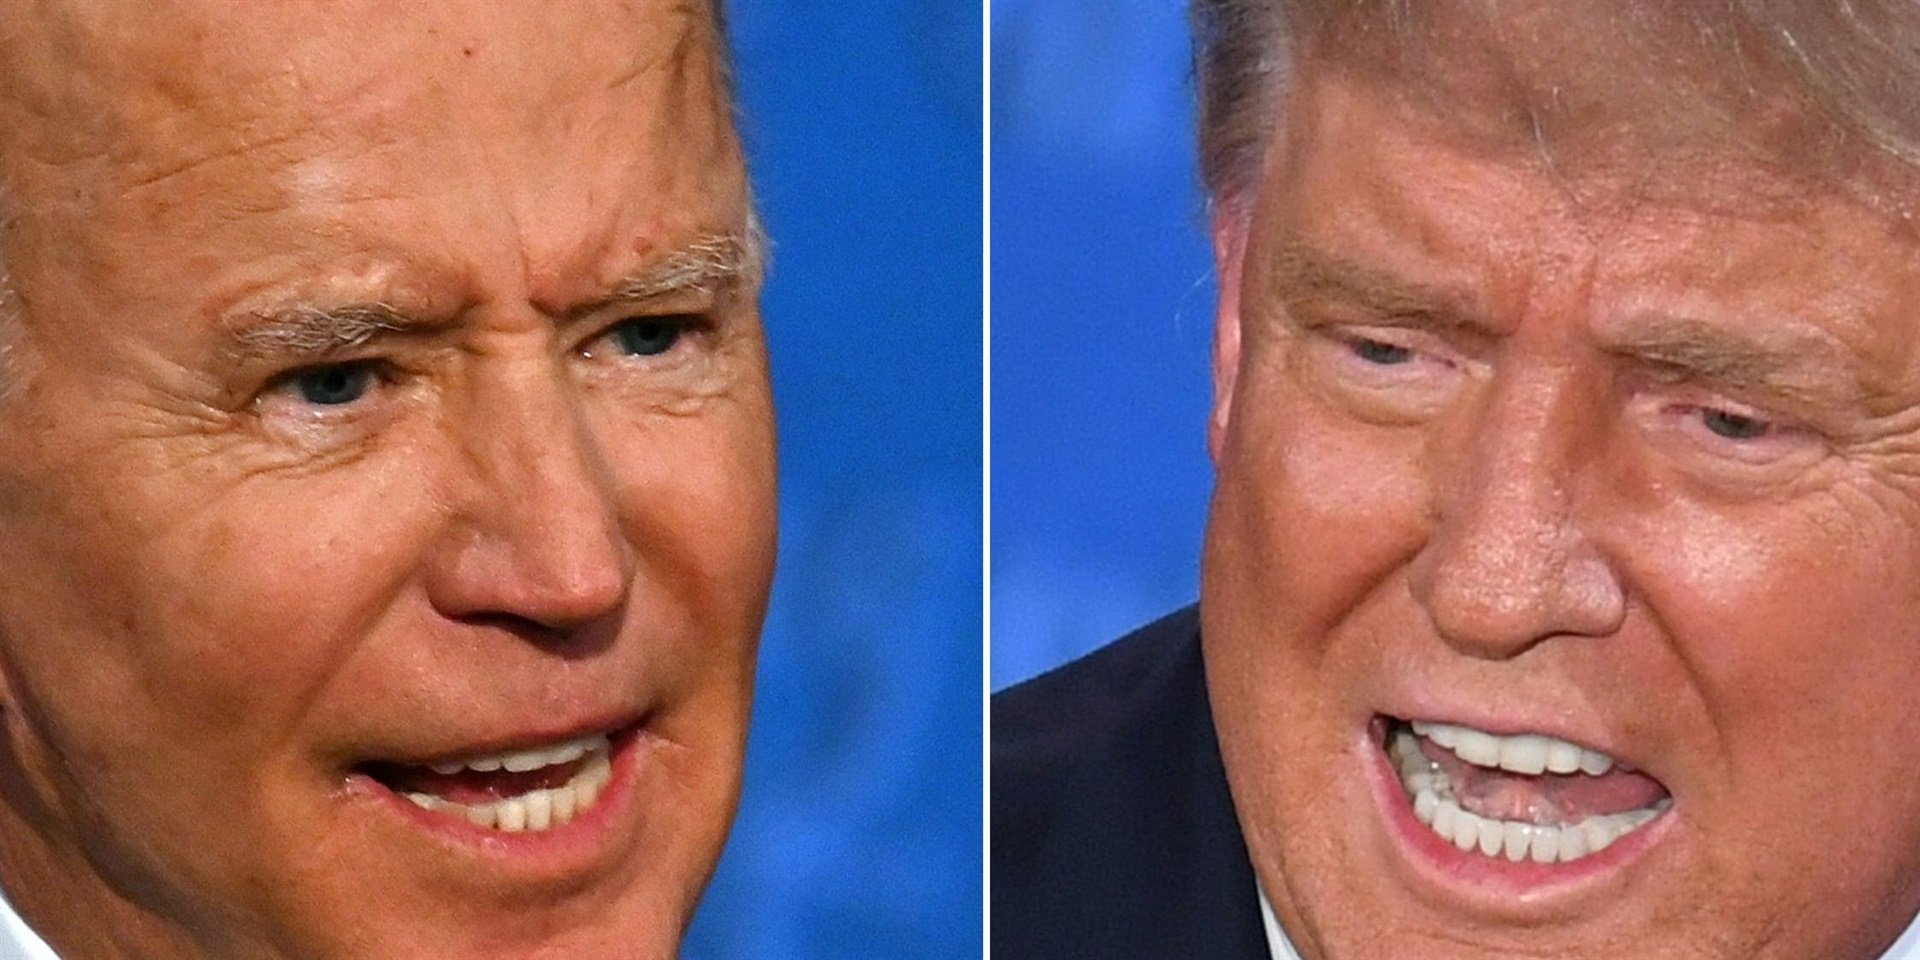 A composite image of Democratic presidential nominee Joe Biden and President Donald Trump at the first presidential debate in Cleveland, Ohio, on September 29, 2020.
